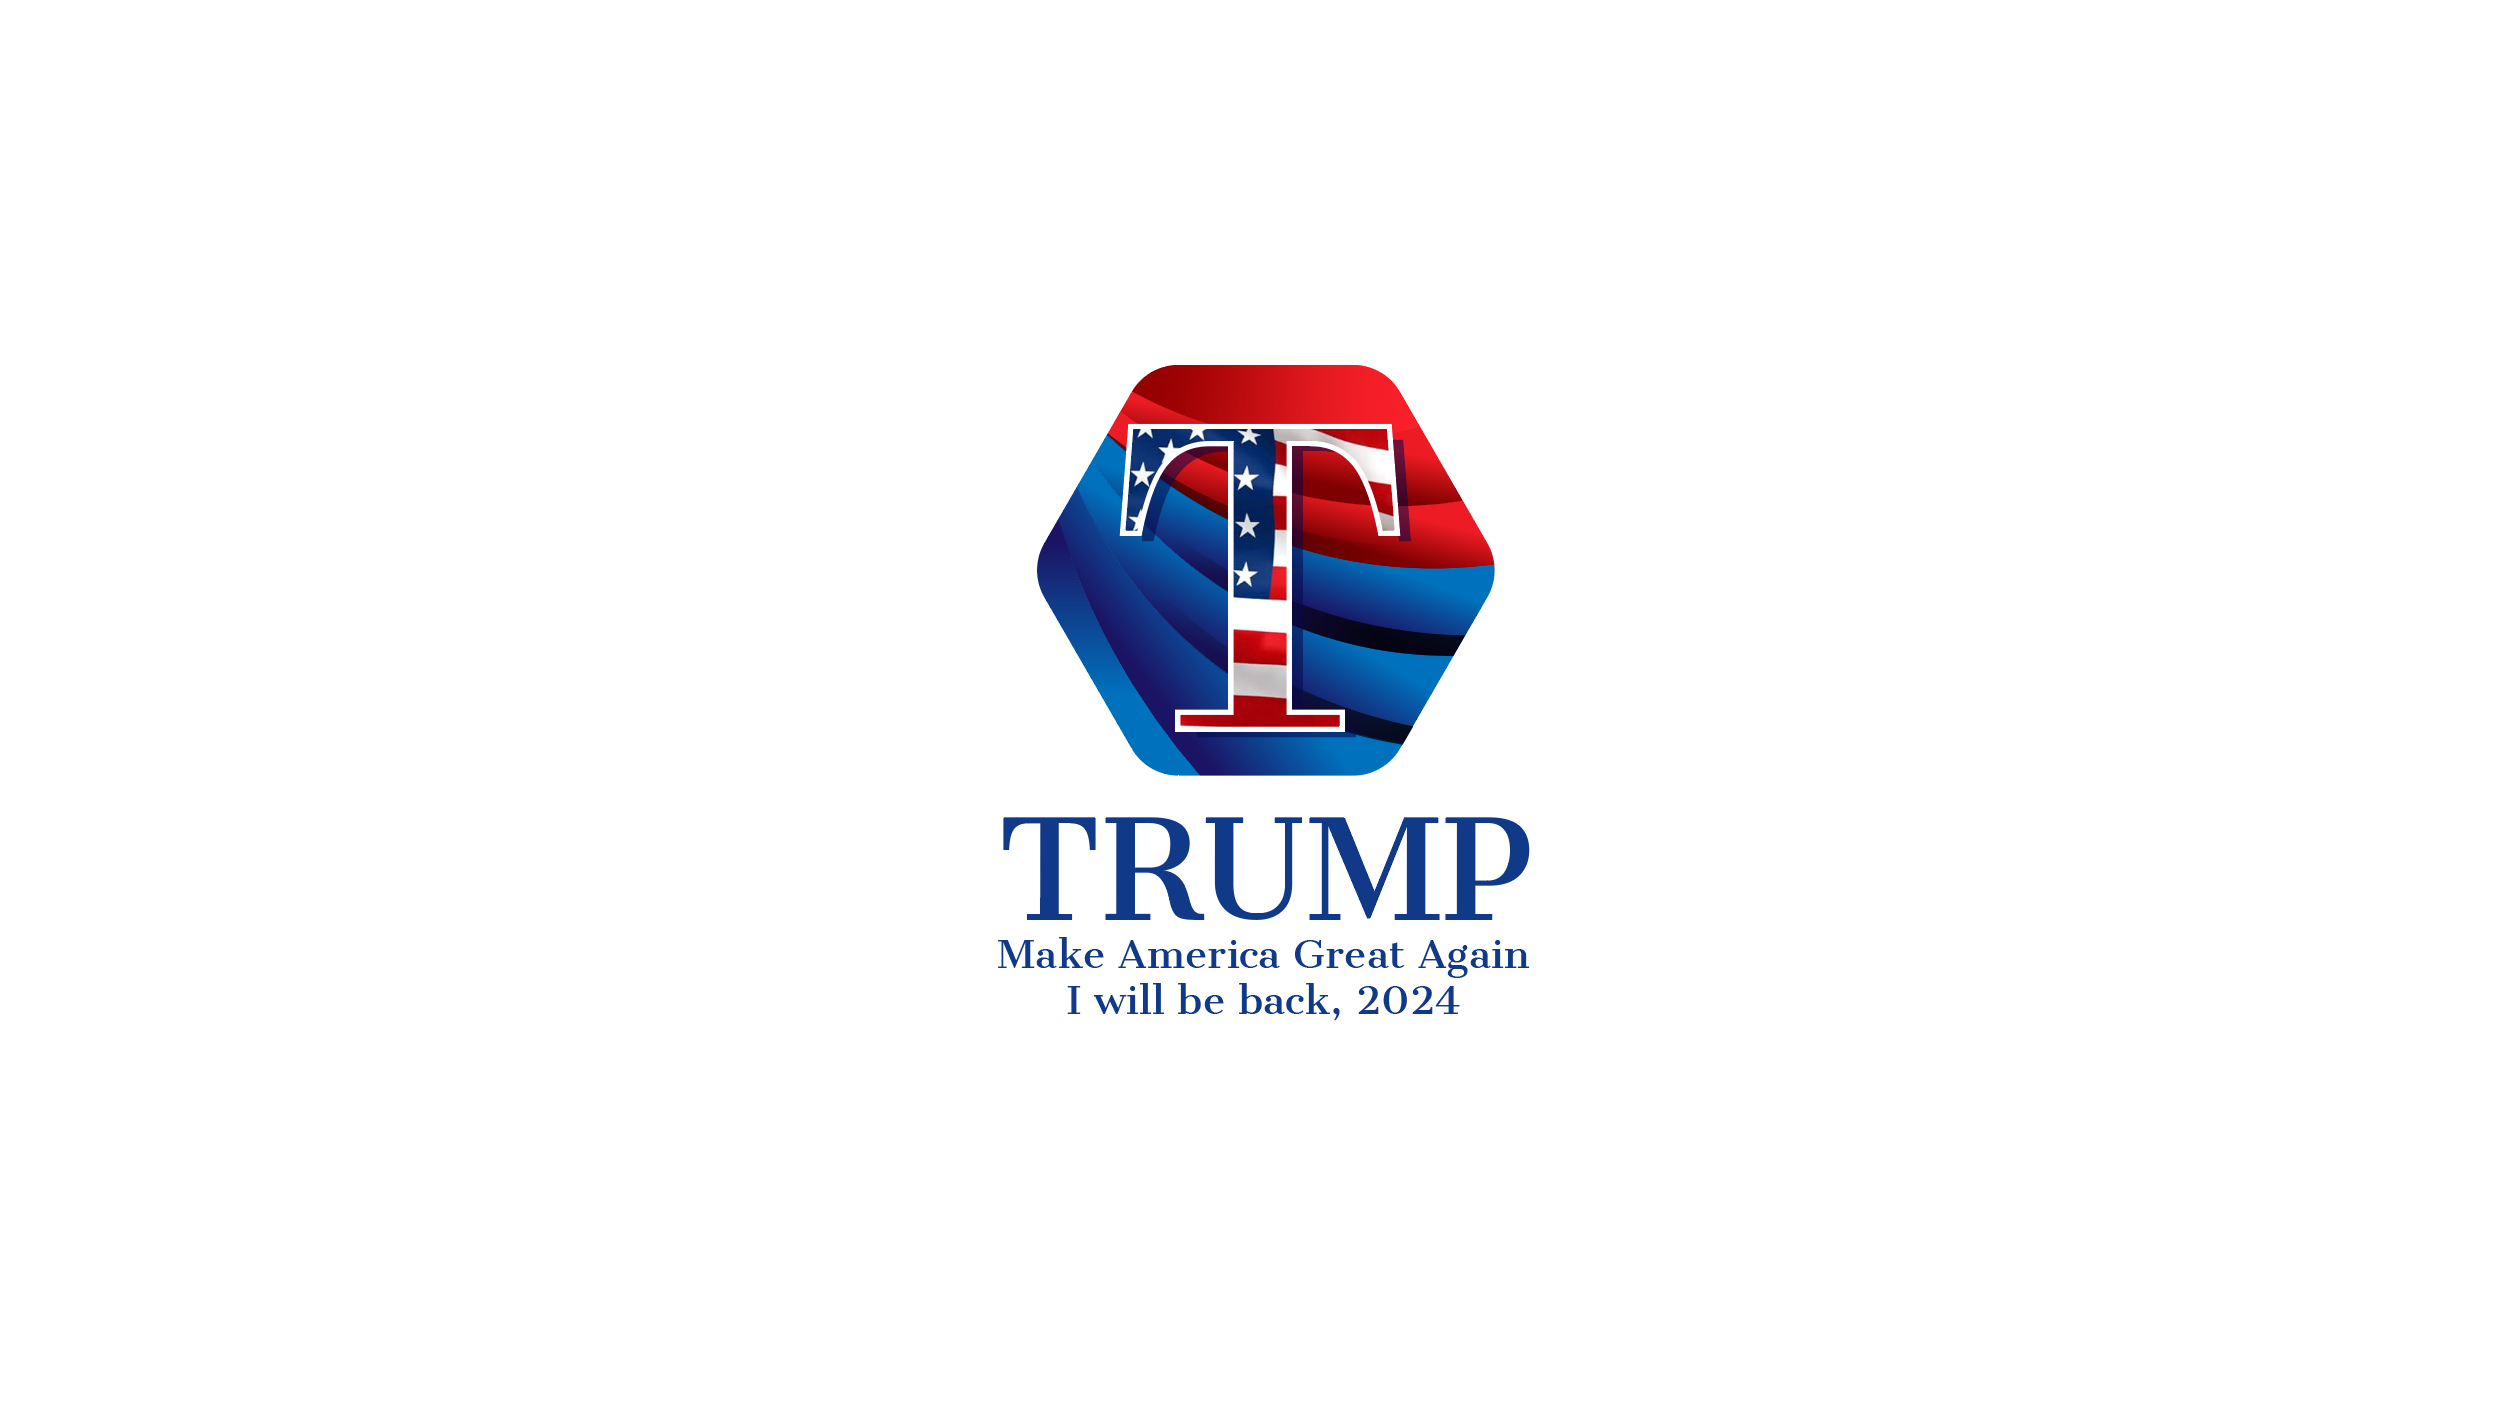 This Maga Trump token to help President Trump’s legal fees 90% of the profit will be donated to his legal fees